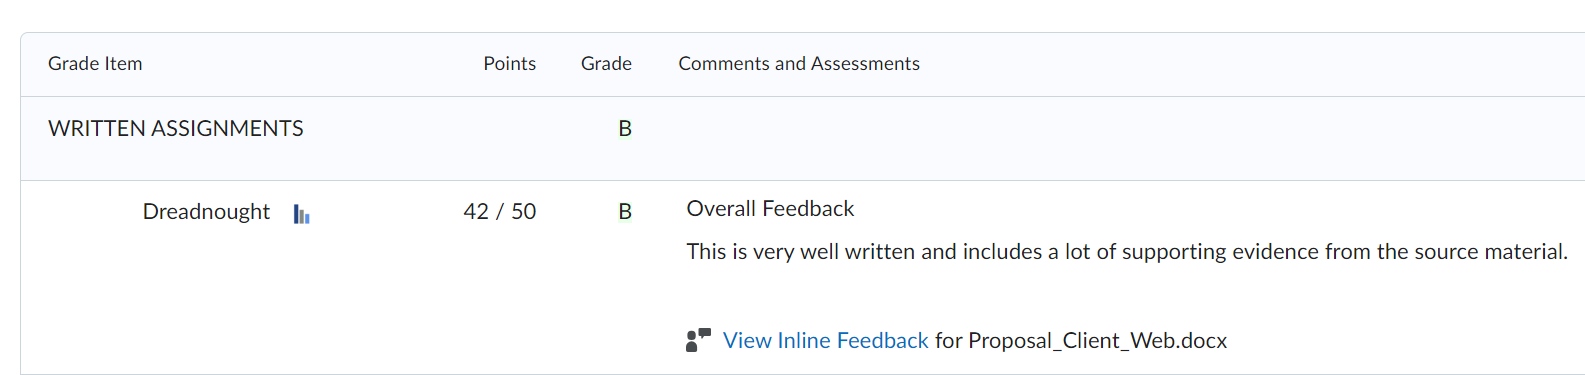 Inline feedback from a student's view.